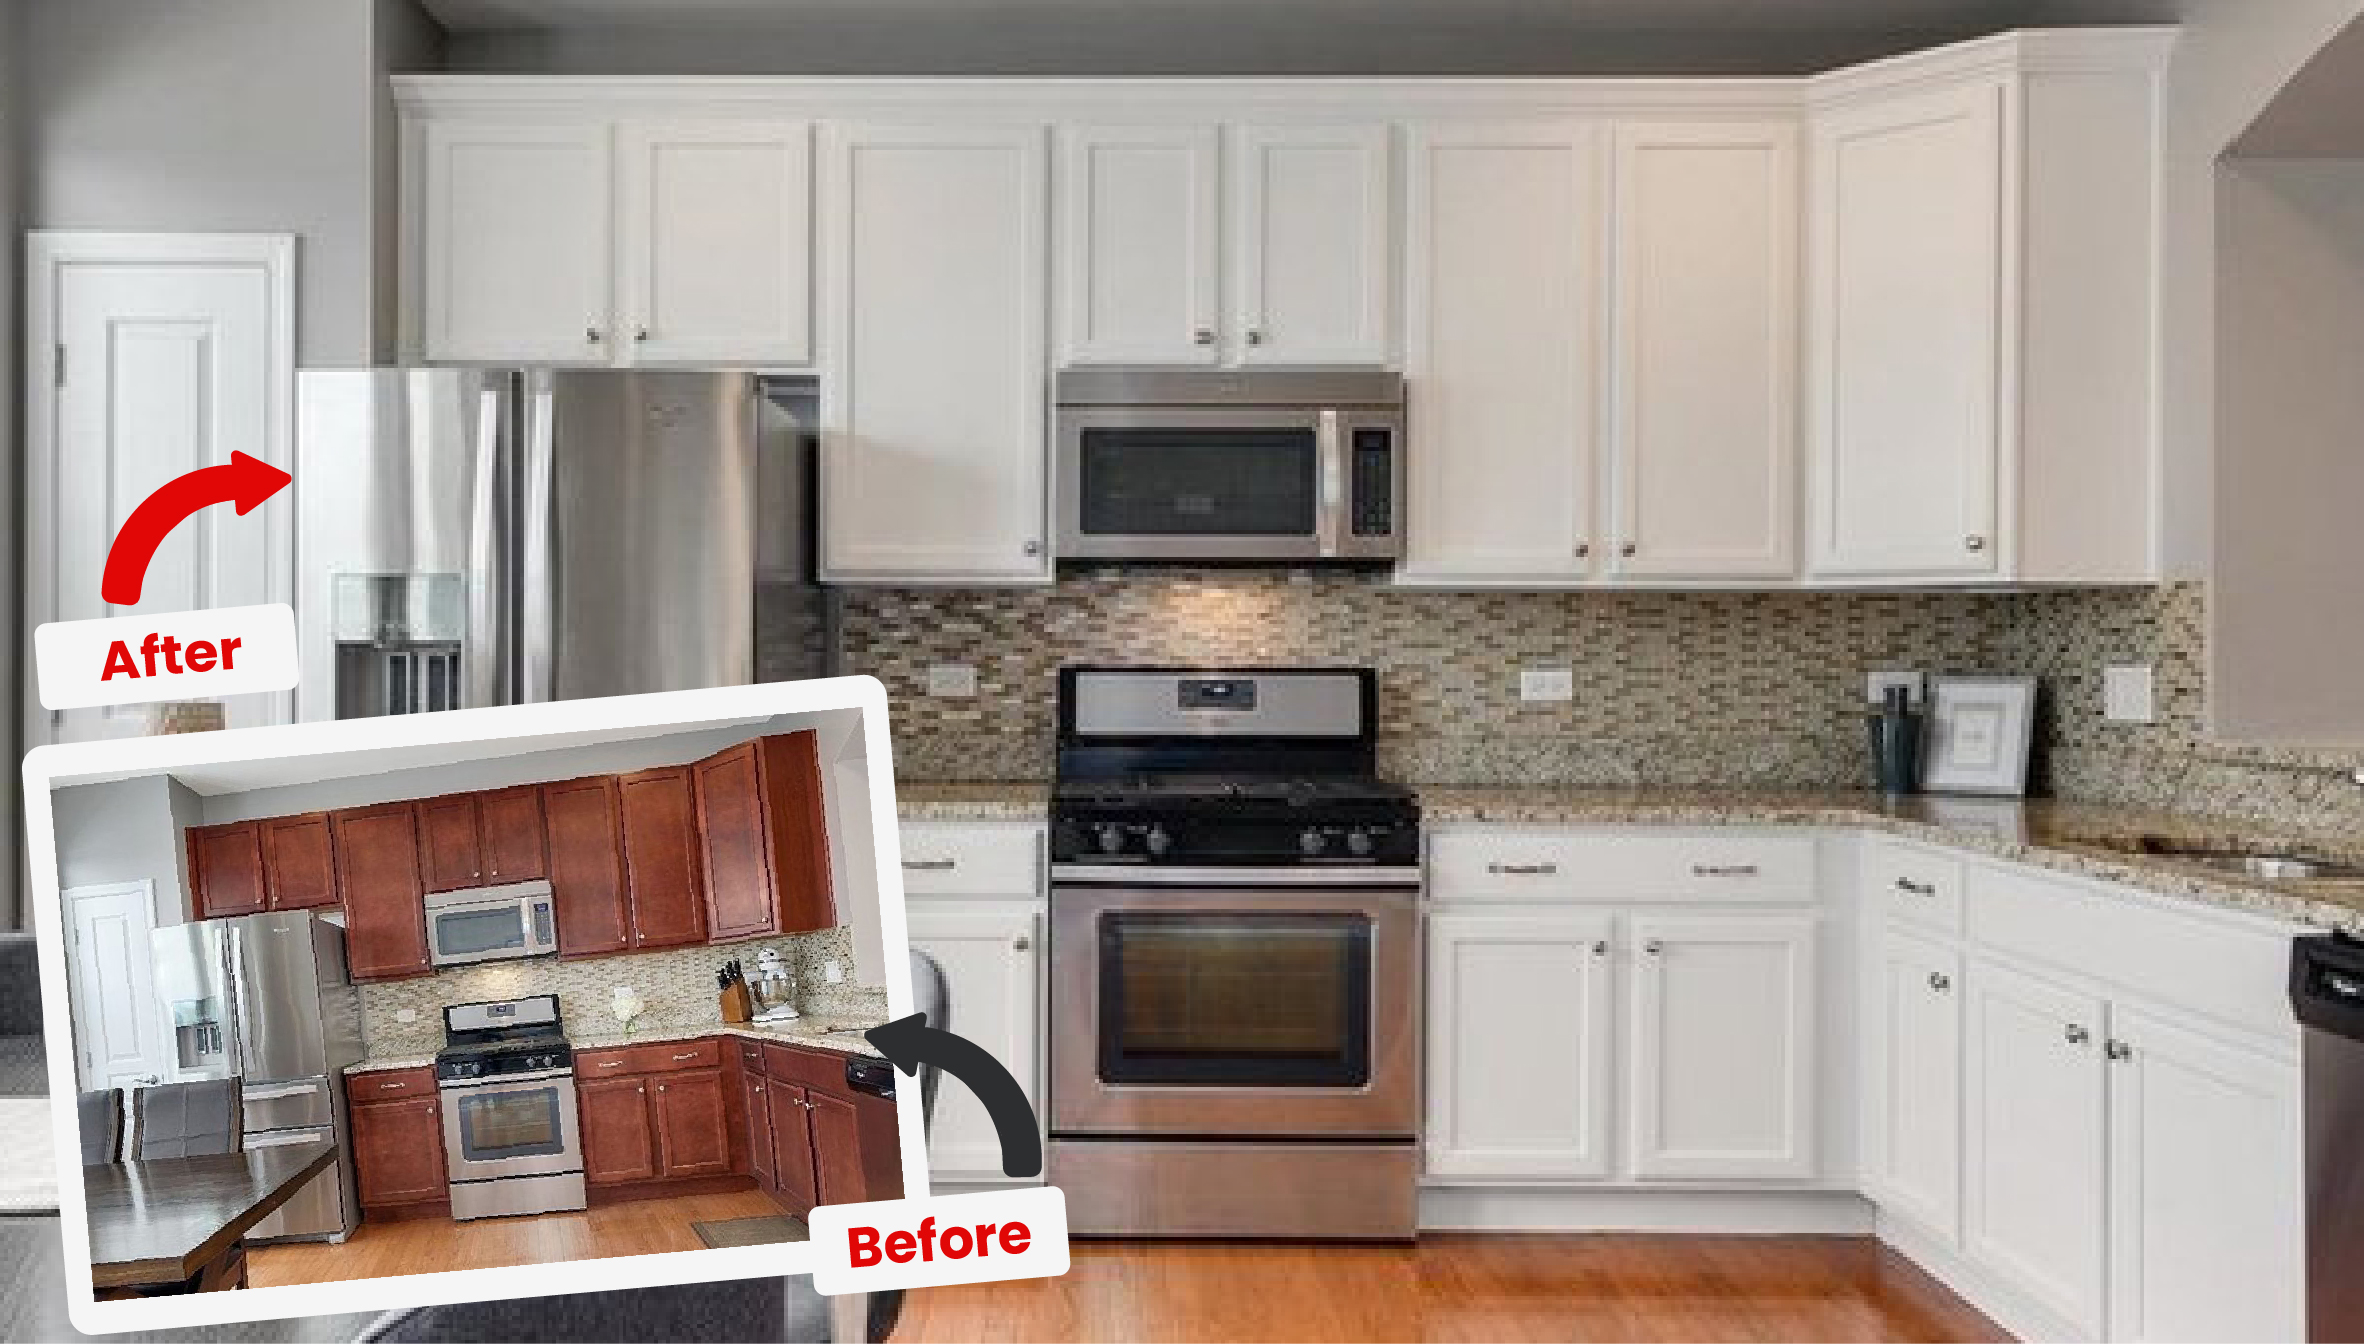 8 Kitchen Cabinet Refacing Before and After Projects